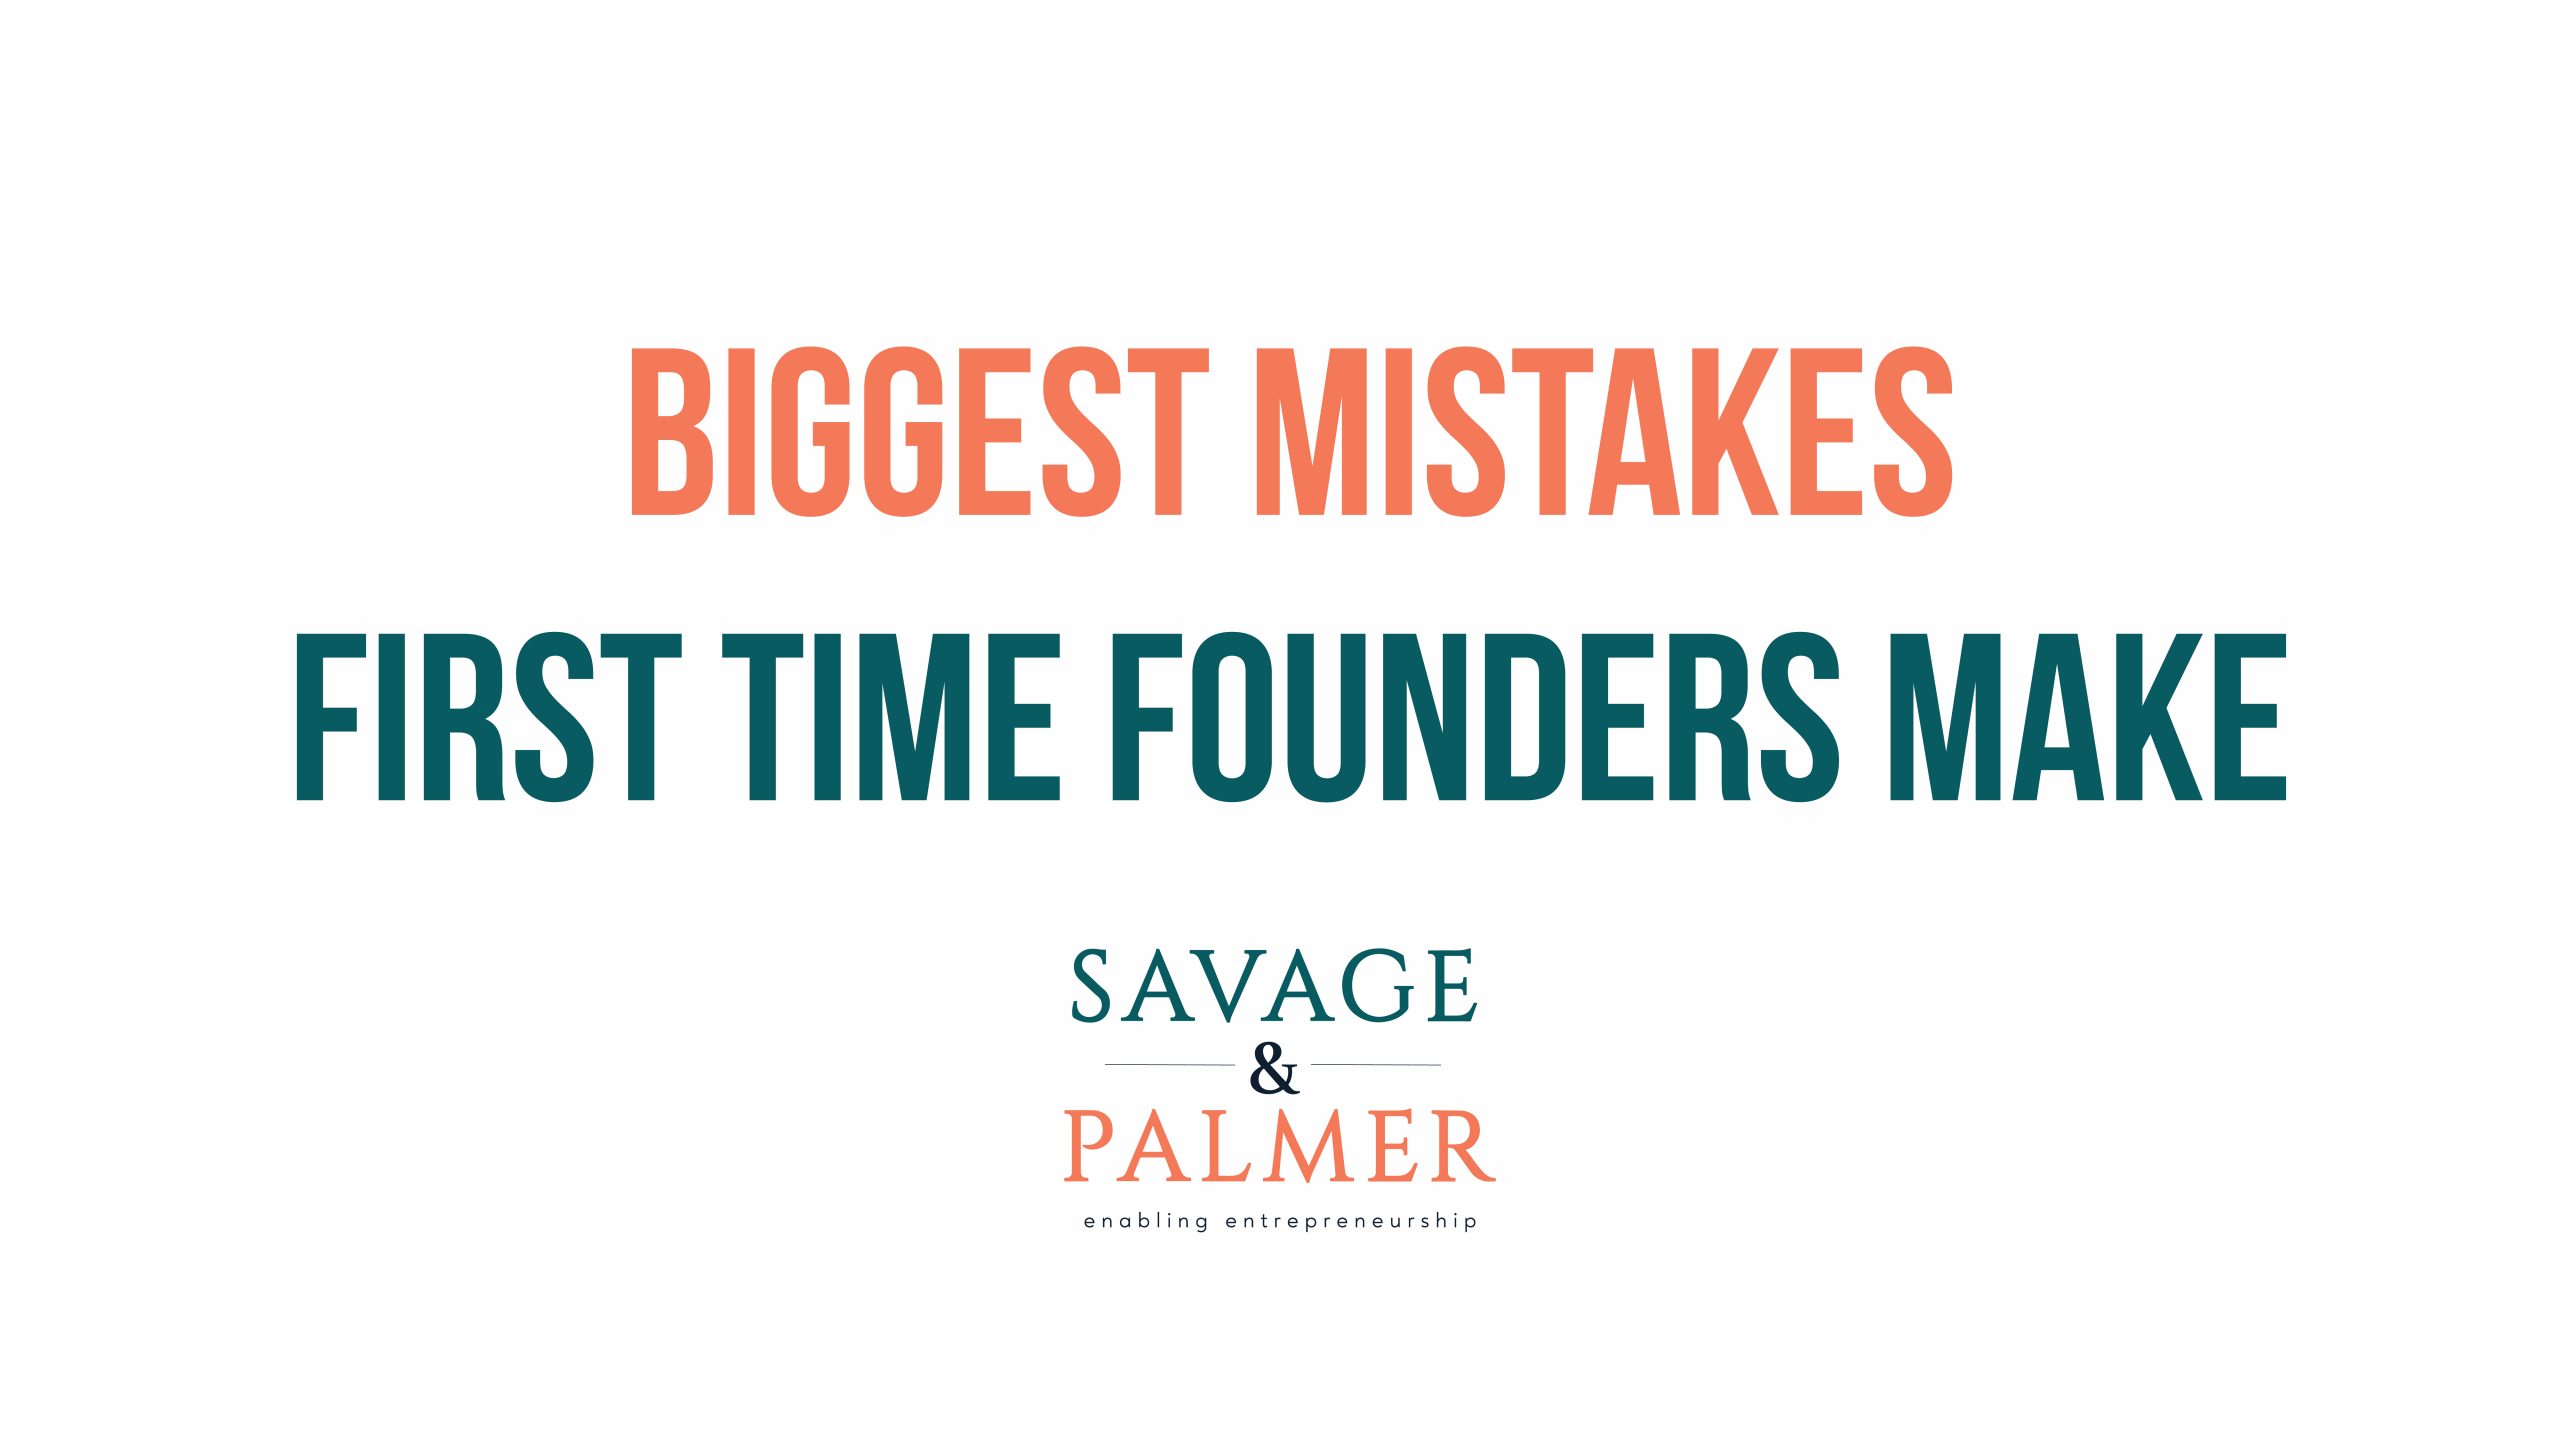 6-Biggest Mistakes You As A First-Time Founder Should Avoid